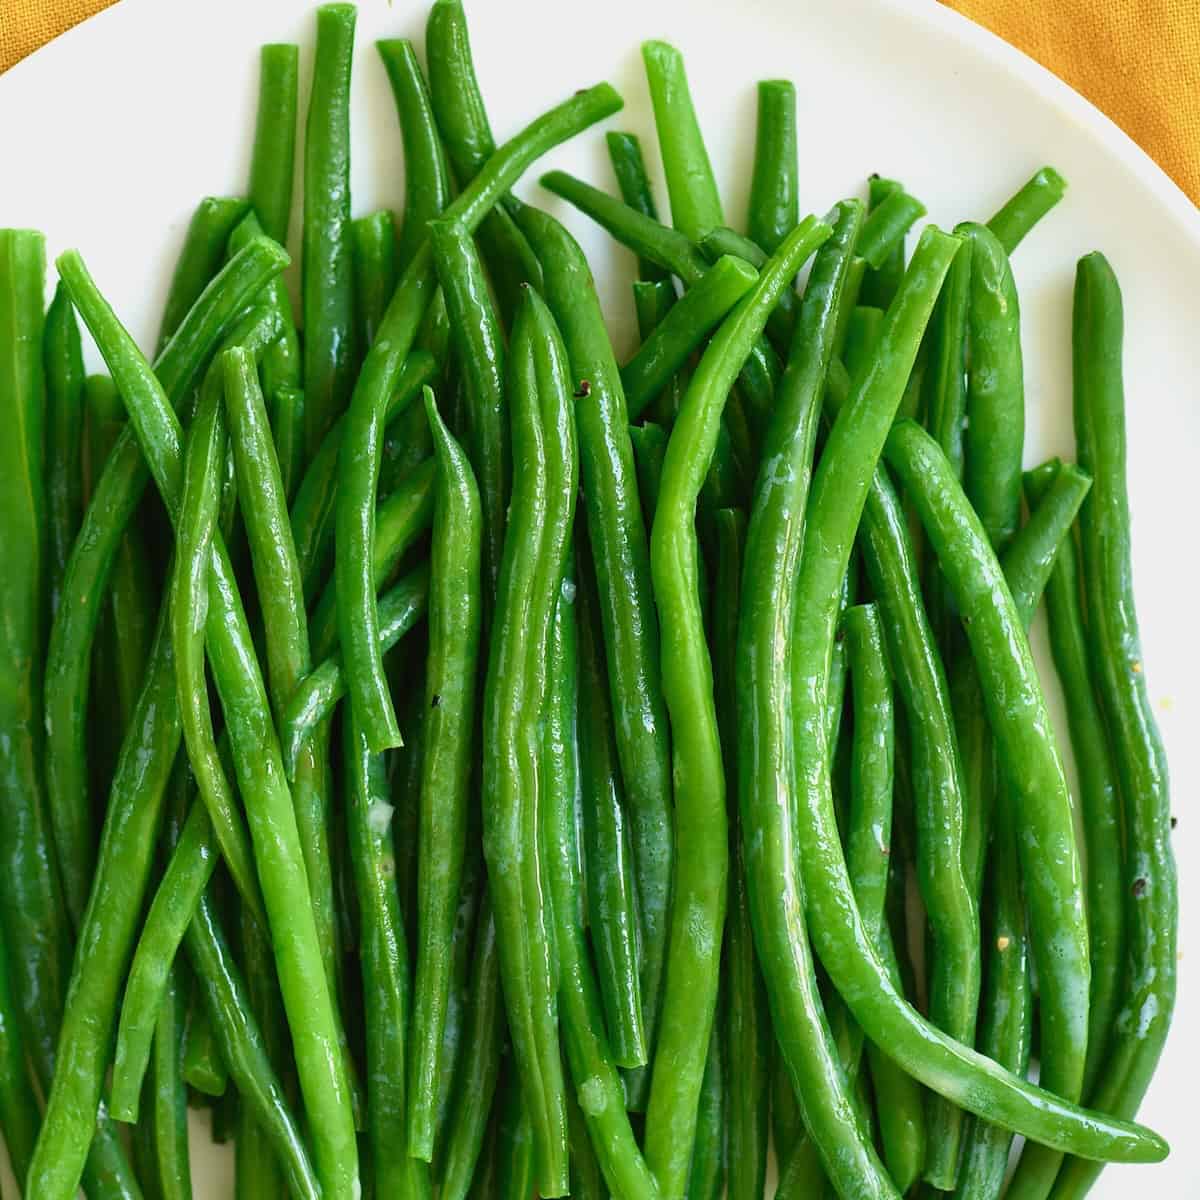 https://www.alphafoodie.com/wp-content/uploads/2022/08/How-to-boil-green-beans-square.jpeg